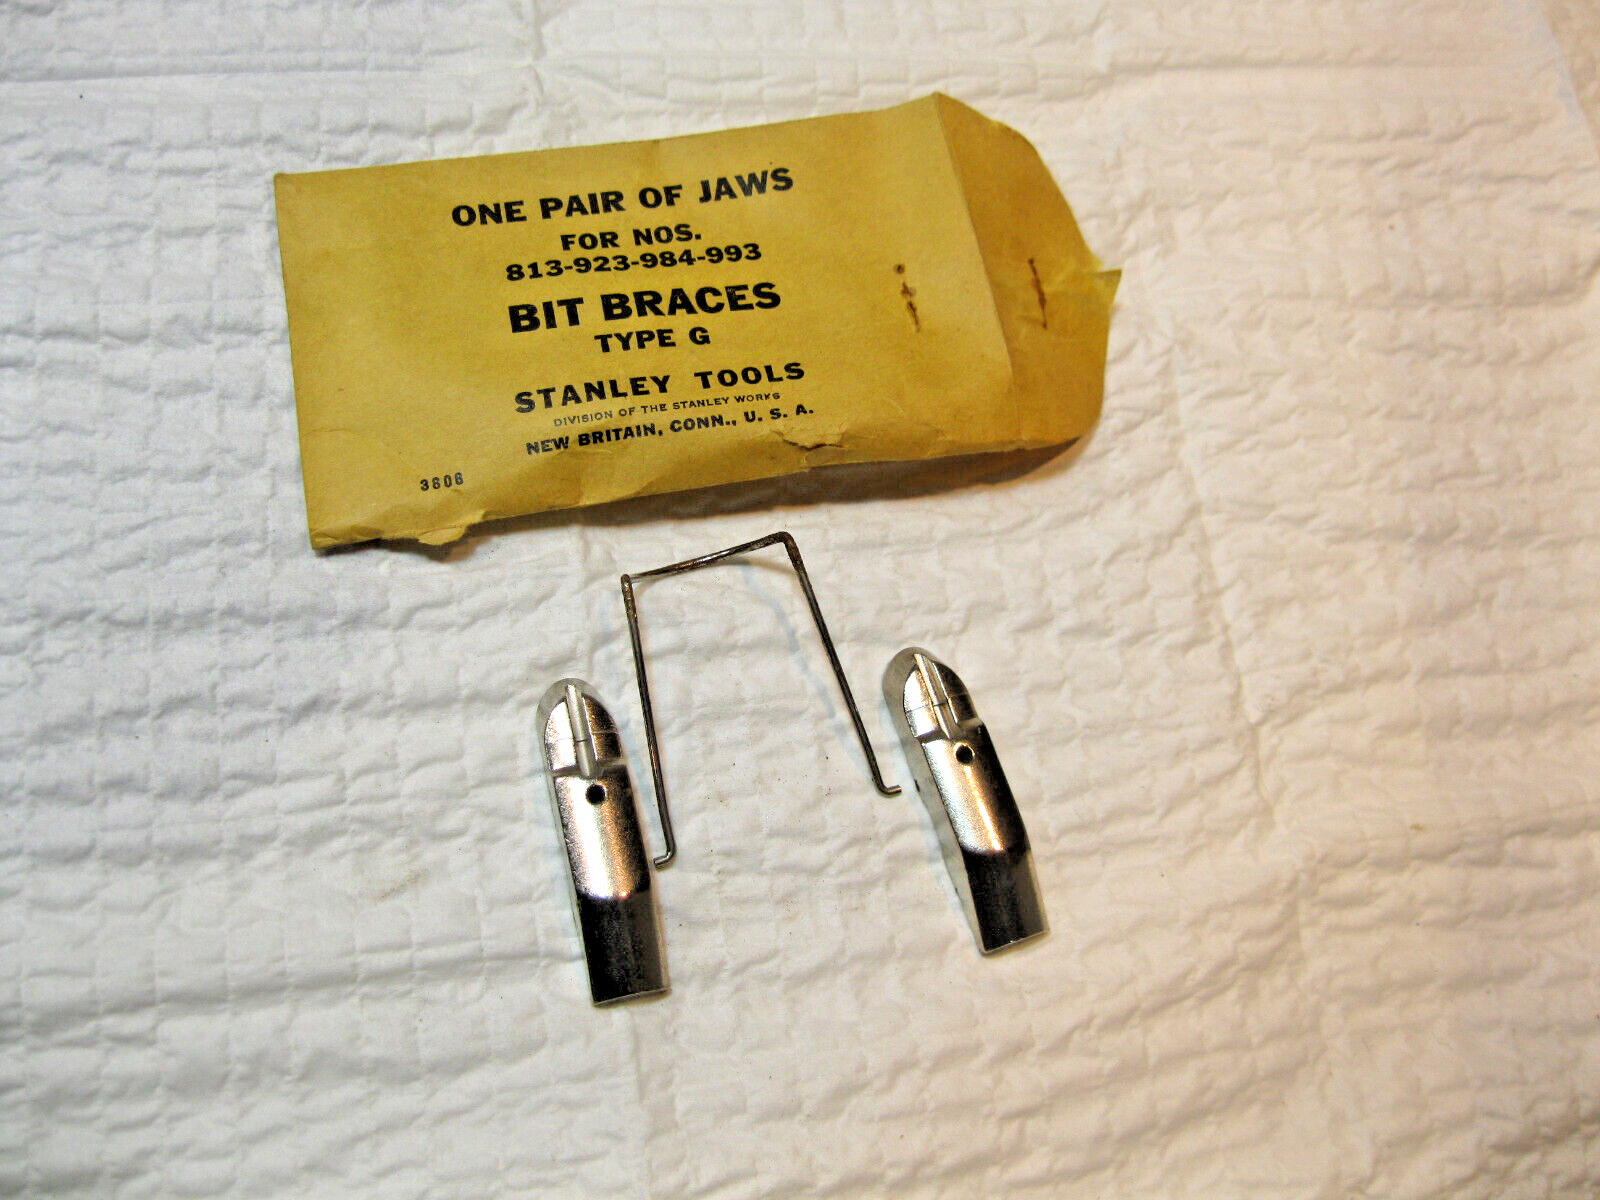 Vintage Stanley Bit Brace Jaws Type G for Stanley No. 813-923-984 or 993 NOS